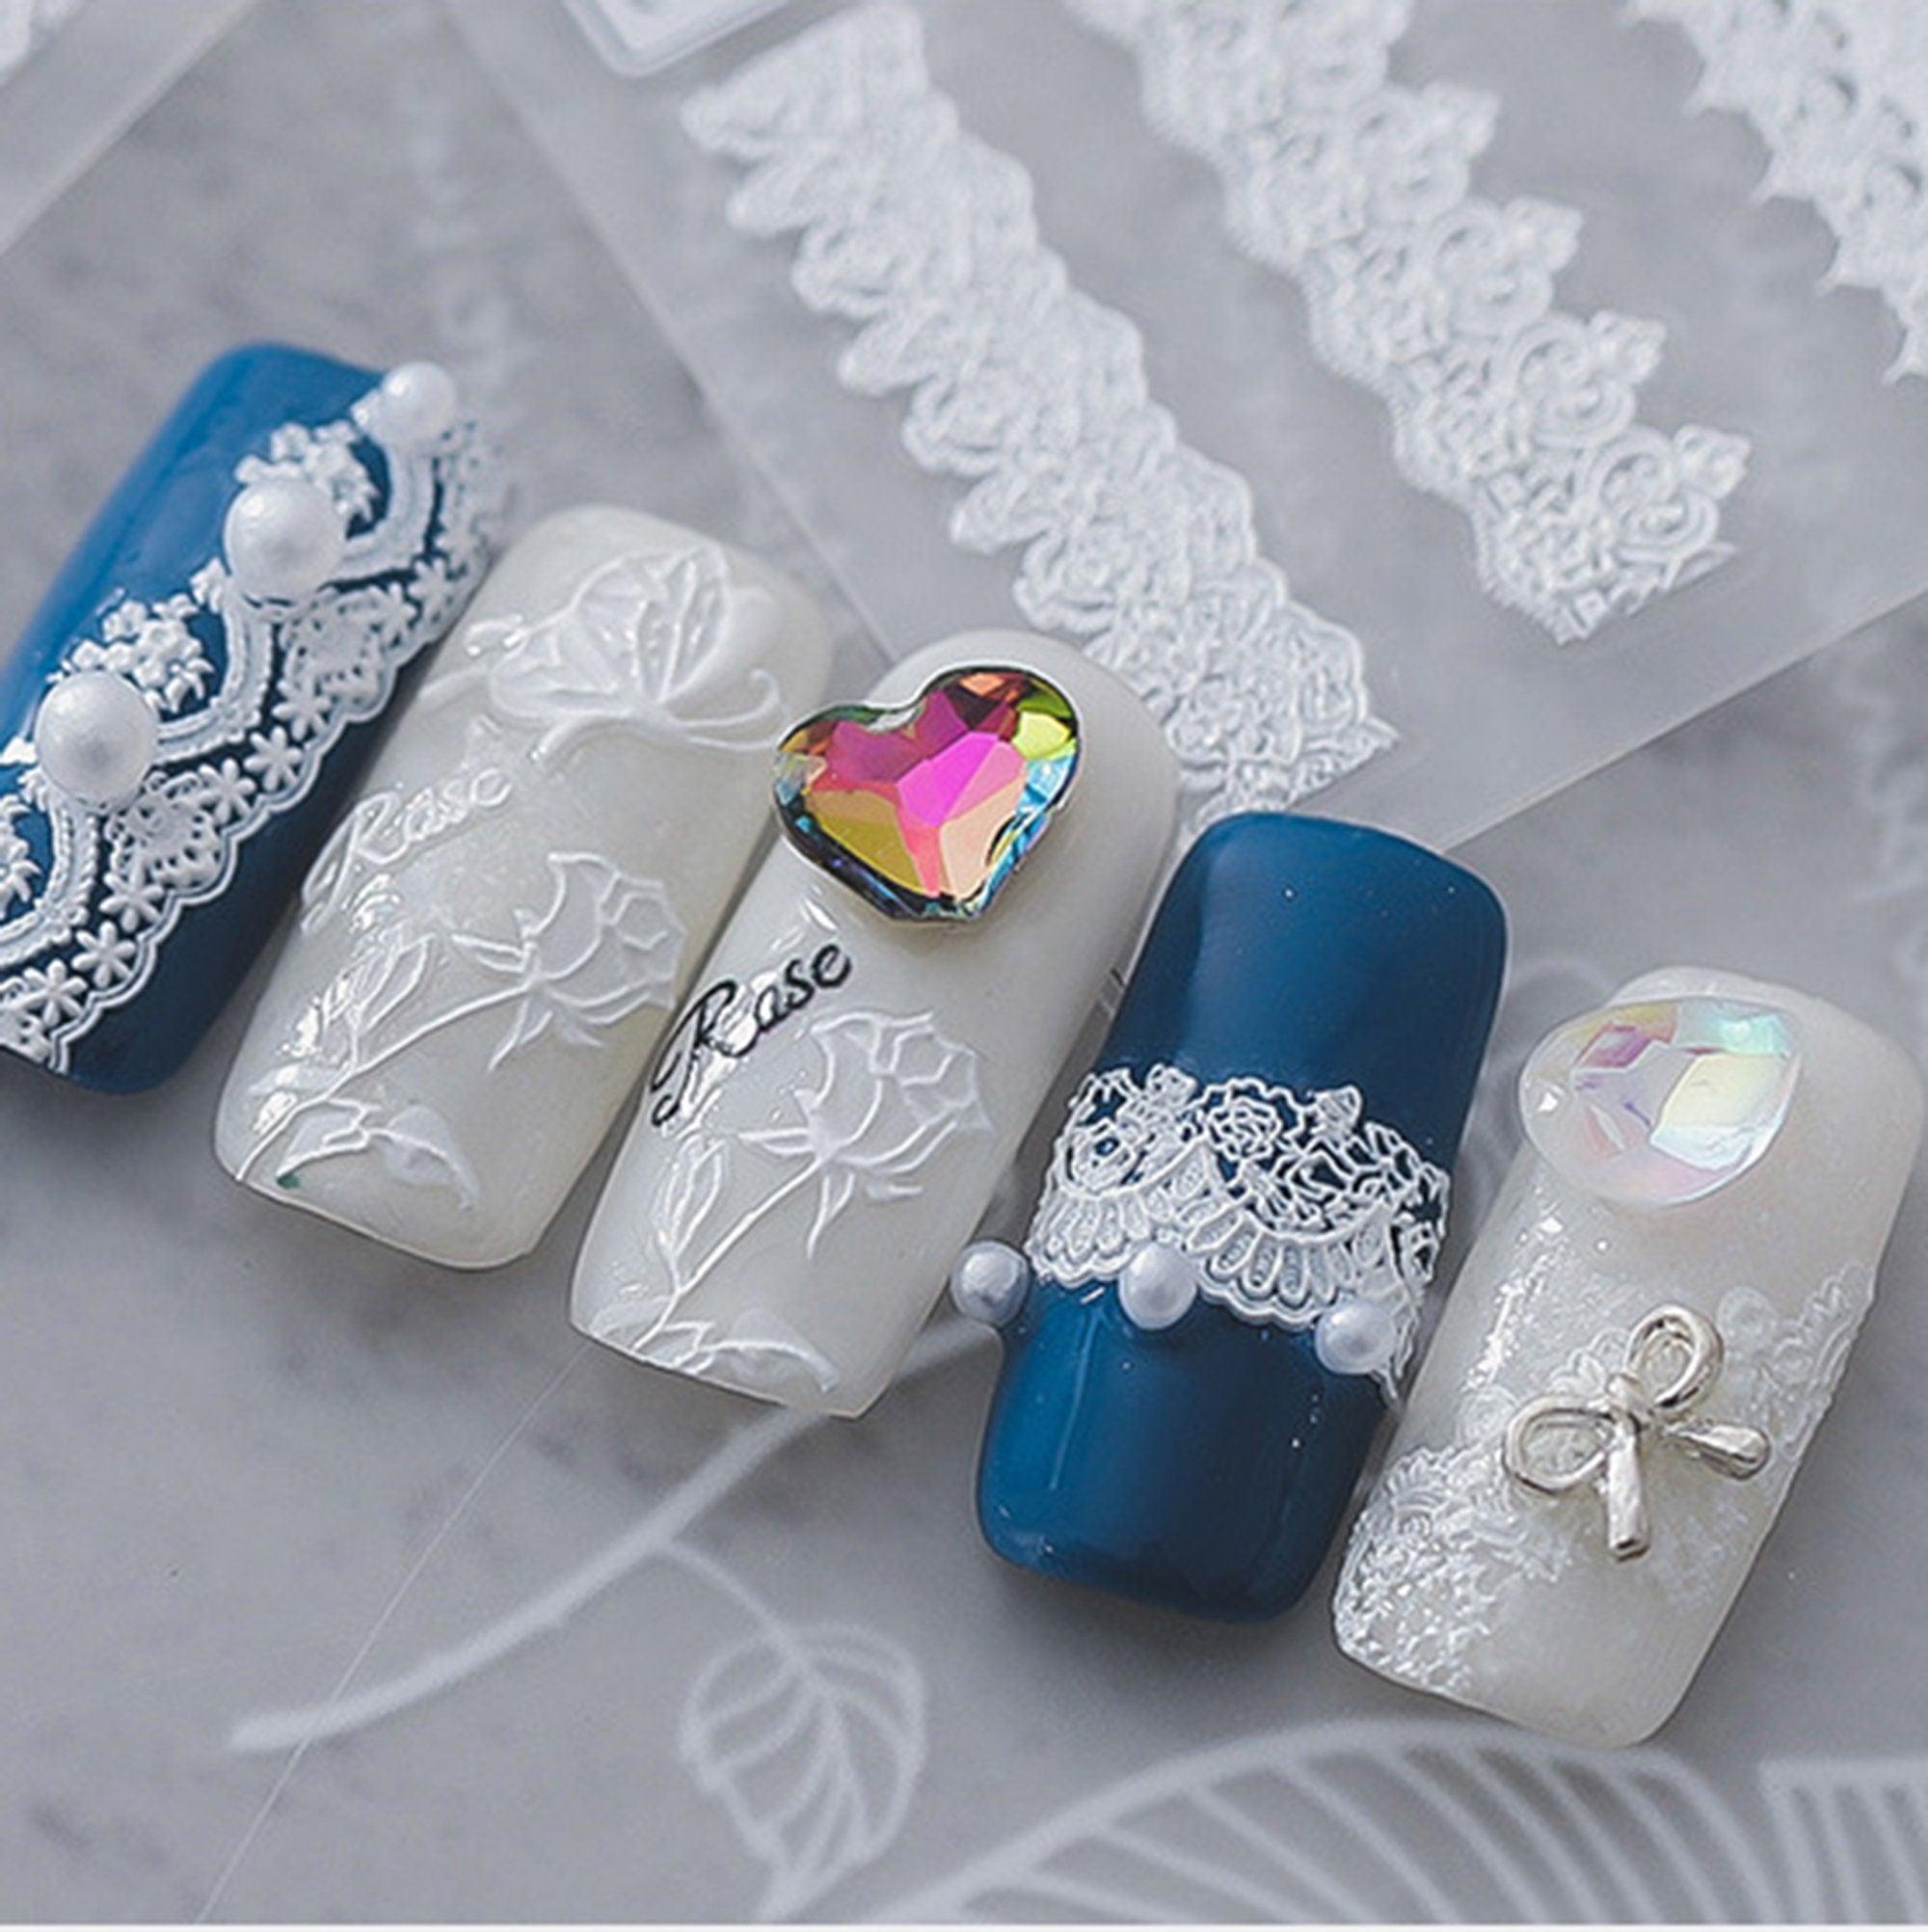 Lace Pattern Nail Stickers, Lace Nail Decals, Nail Decal Art, 5D Embossed, DIY Nails, Manicure Sticker - Miss Fairy Nails